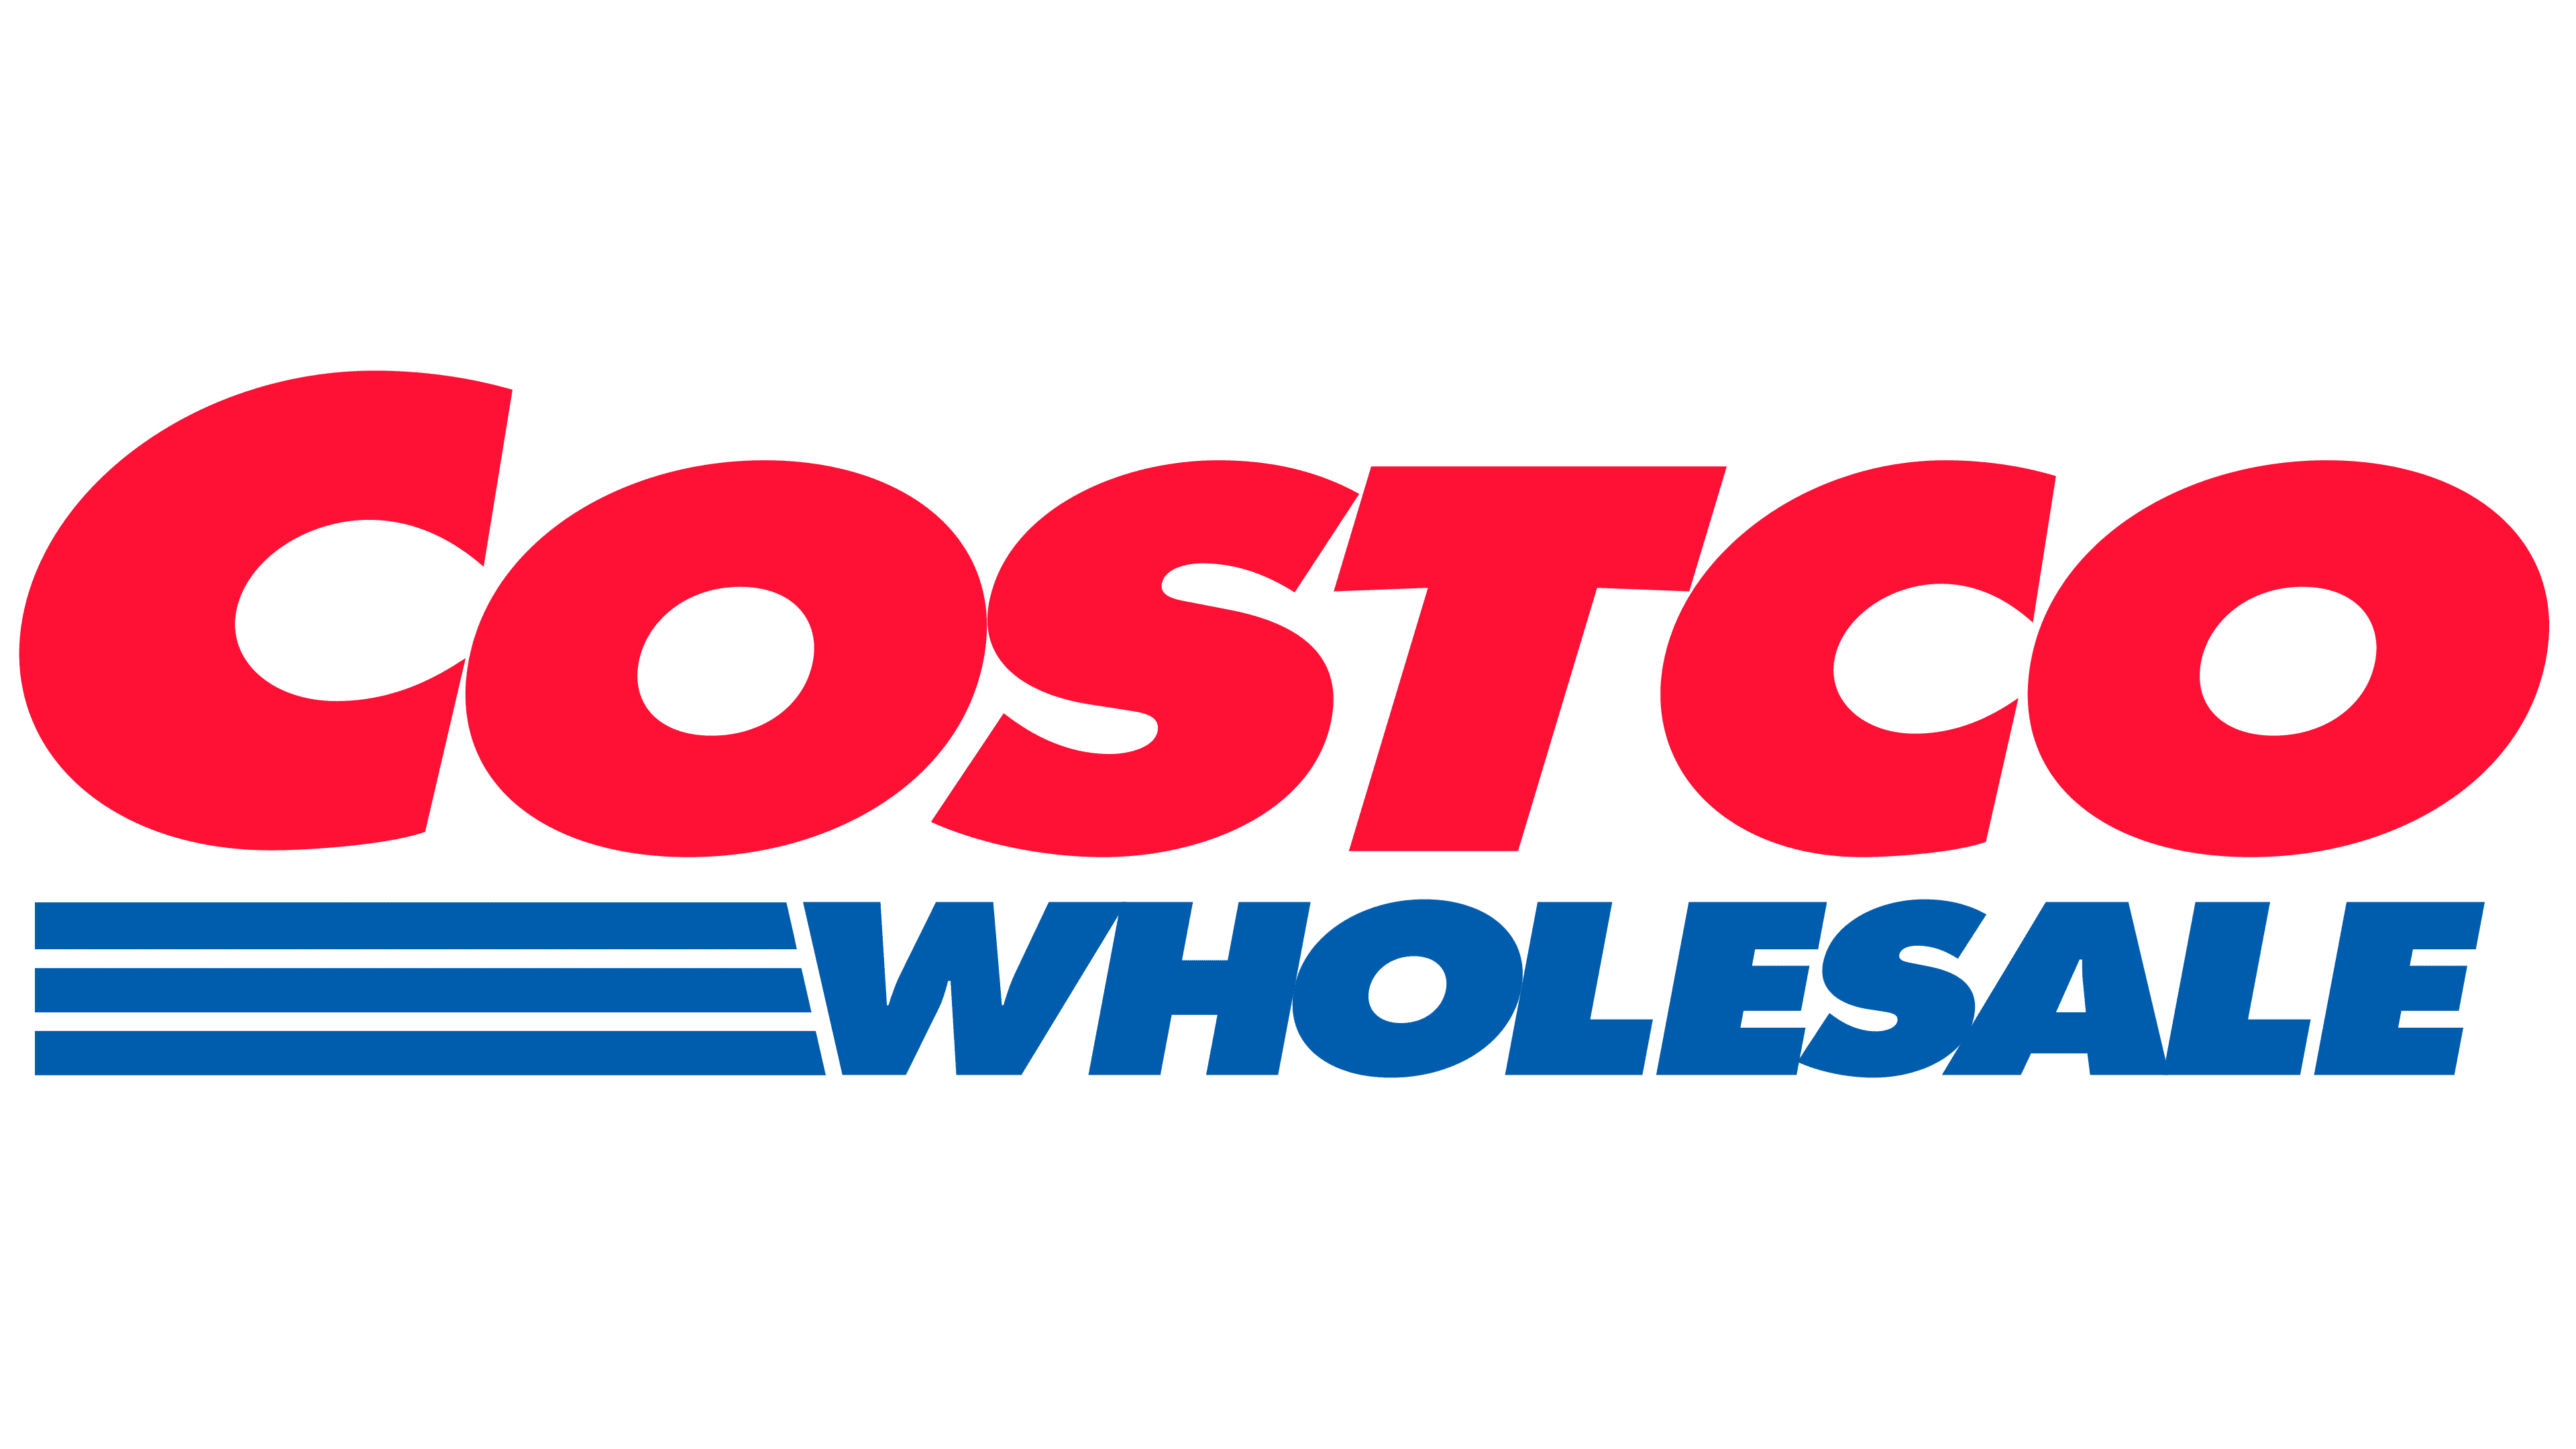 T-Mobile BYOD and activate a line in-Store Costco and get $300 Costco Shop Card per line Max 2 Lines